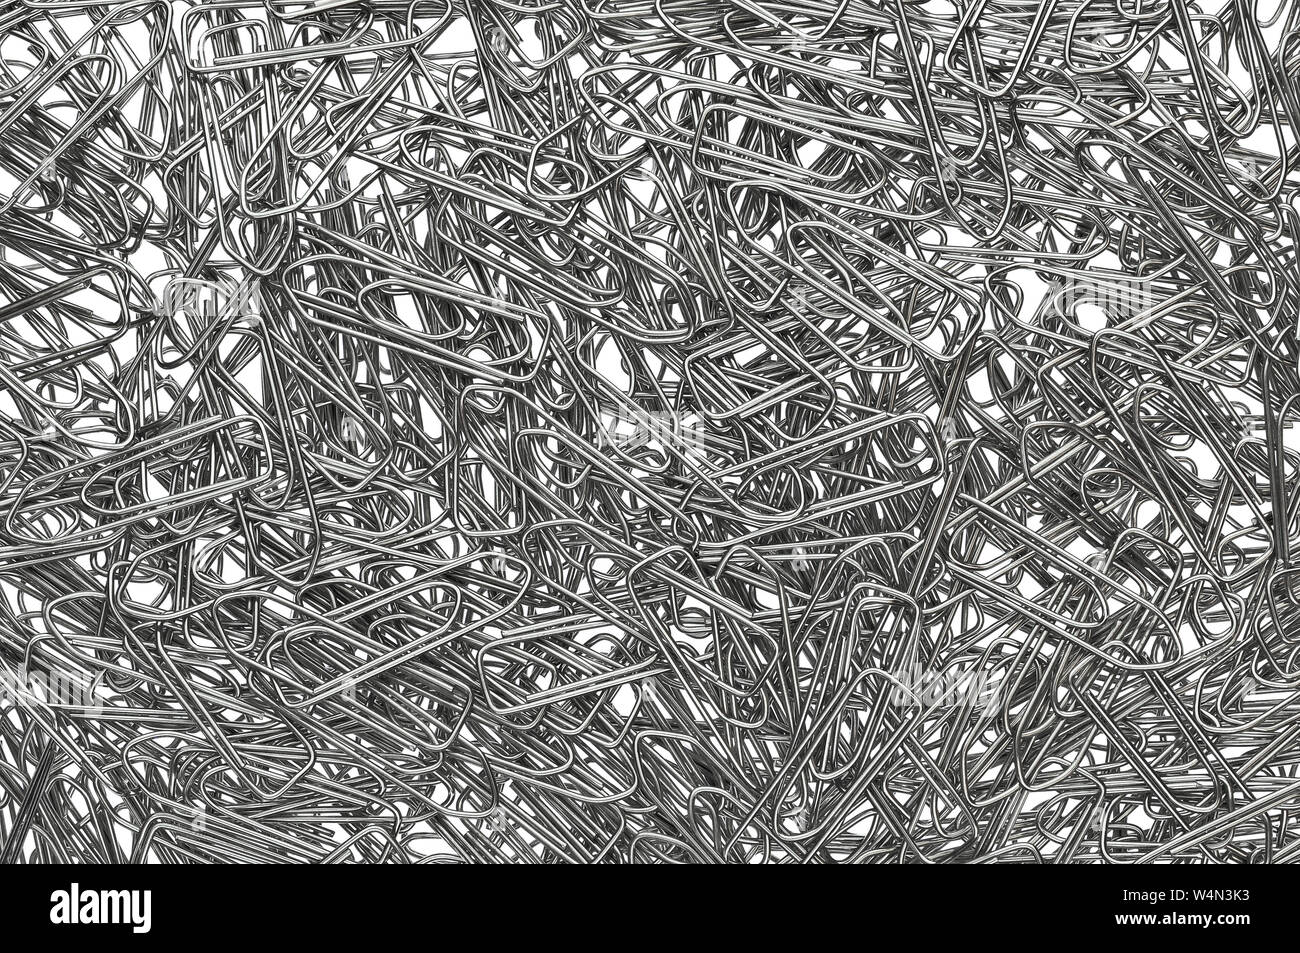 random pile of metal paper clips to use as a stationery background Stock Photo